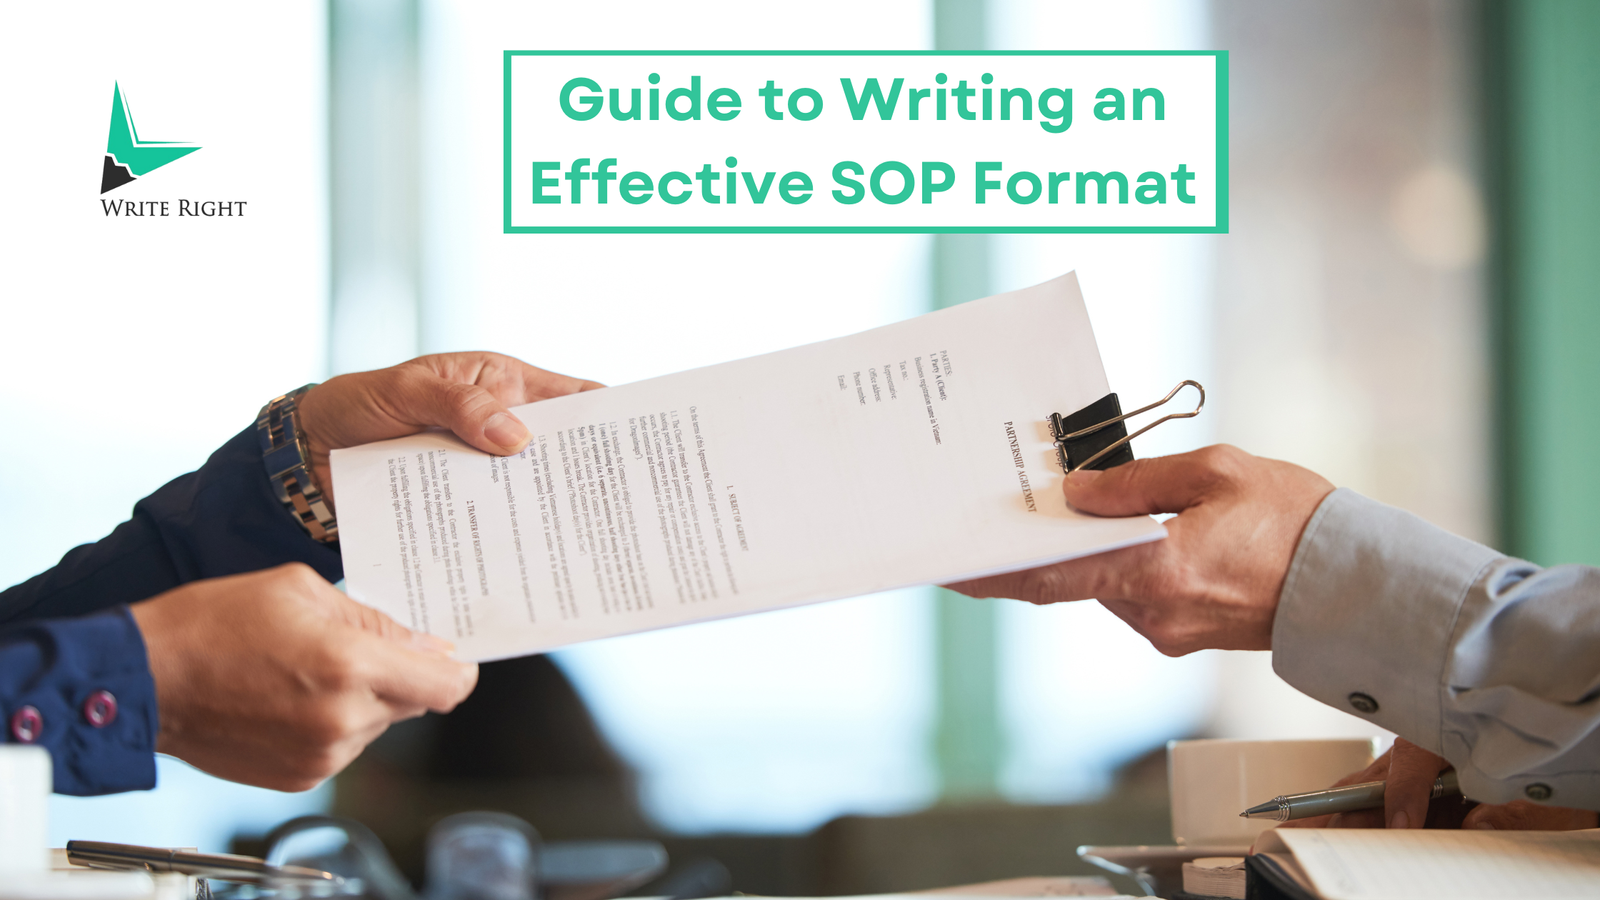 The Comprehensive Guide to Writing an Effective SOP Format (Statement of Purpose Format)